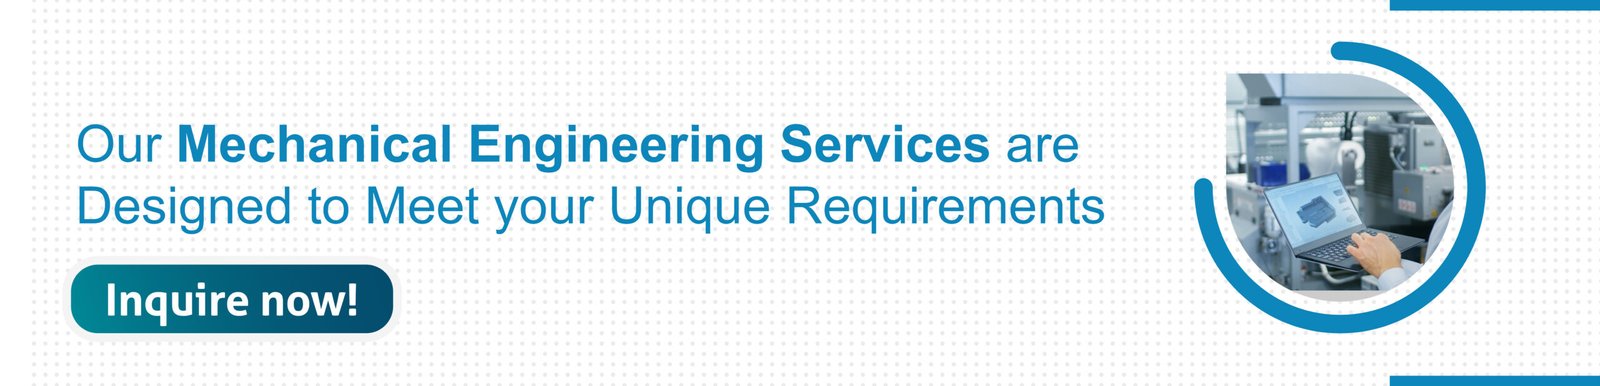 Our mechanical engineering services are designed to meet your unique requirements.